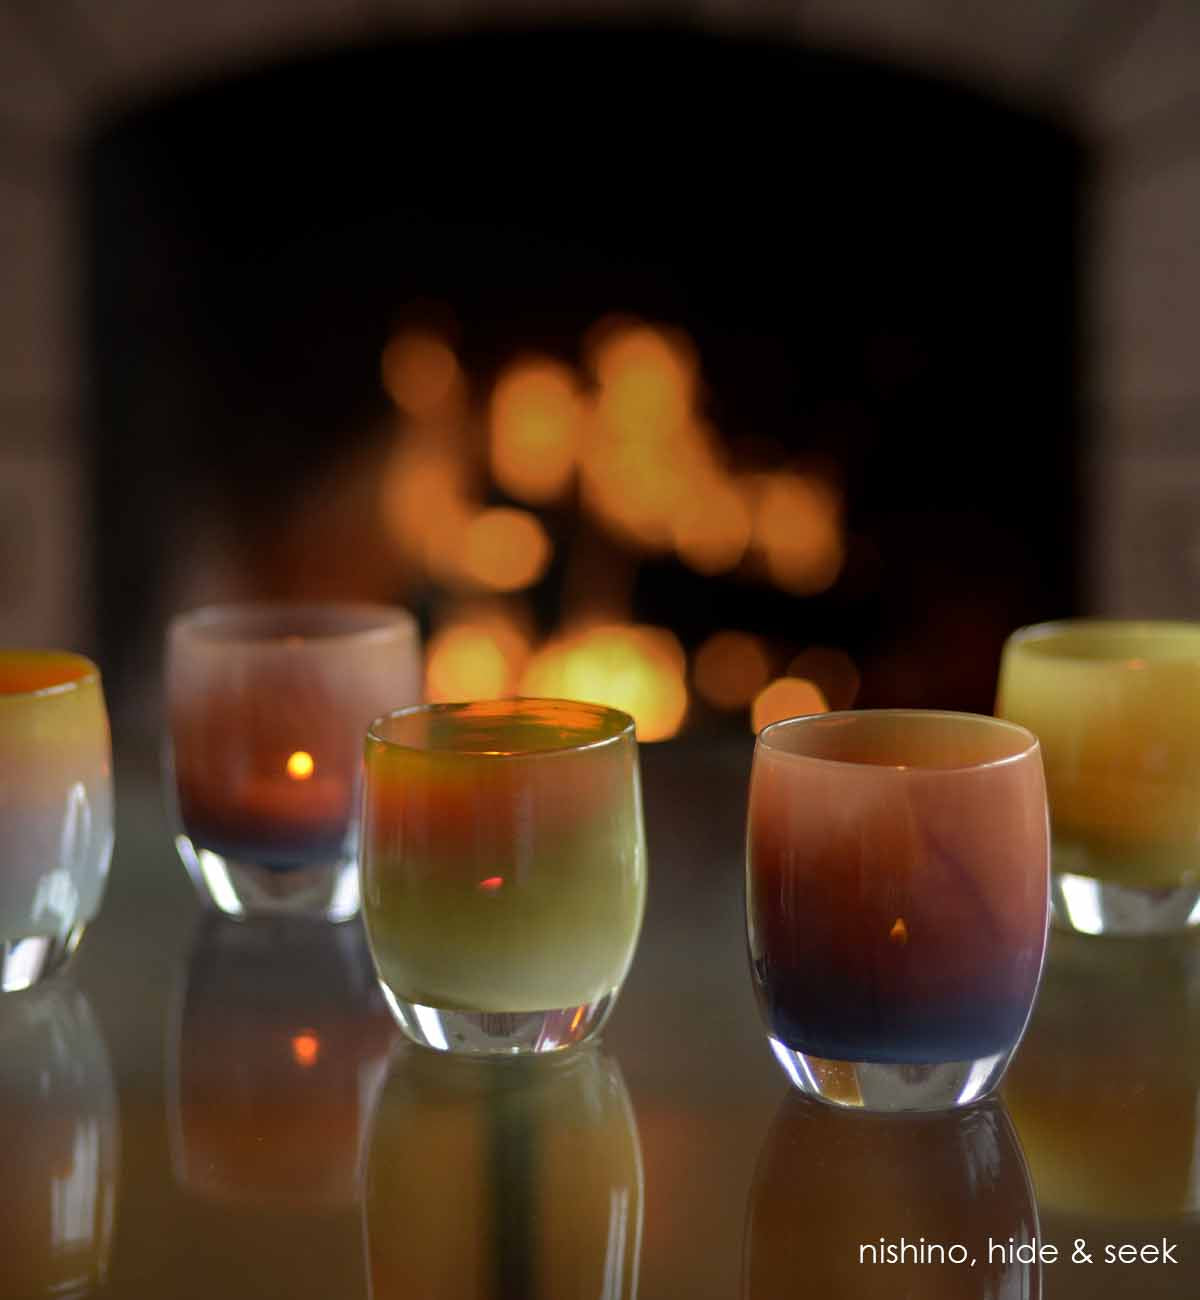 nishino, translucent purple brown hand-blown glass votive candle holder, paired with hide & seek